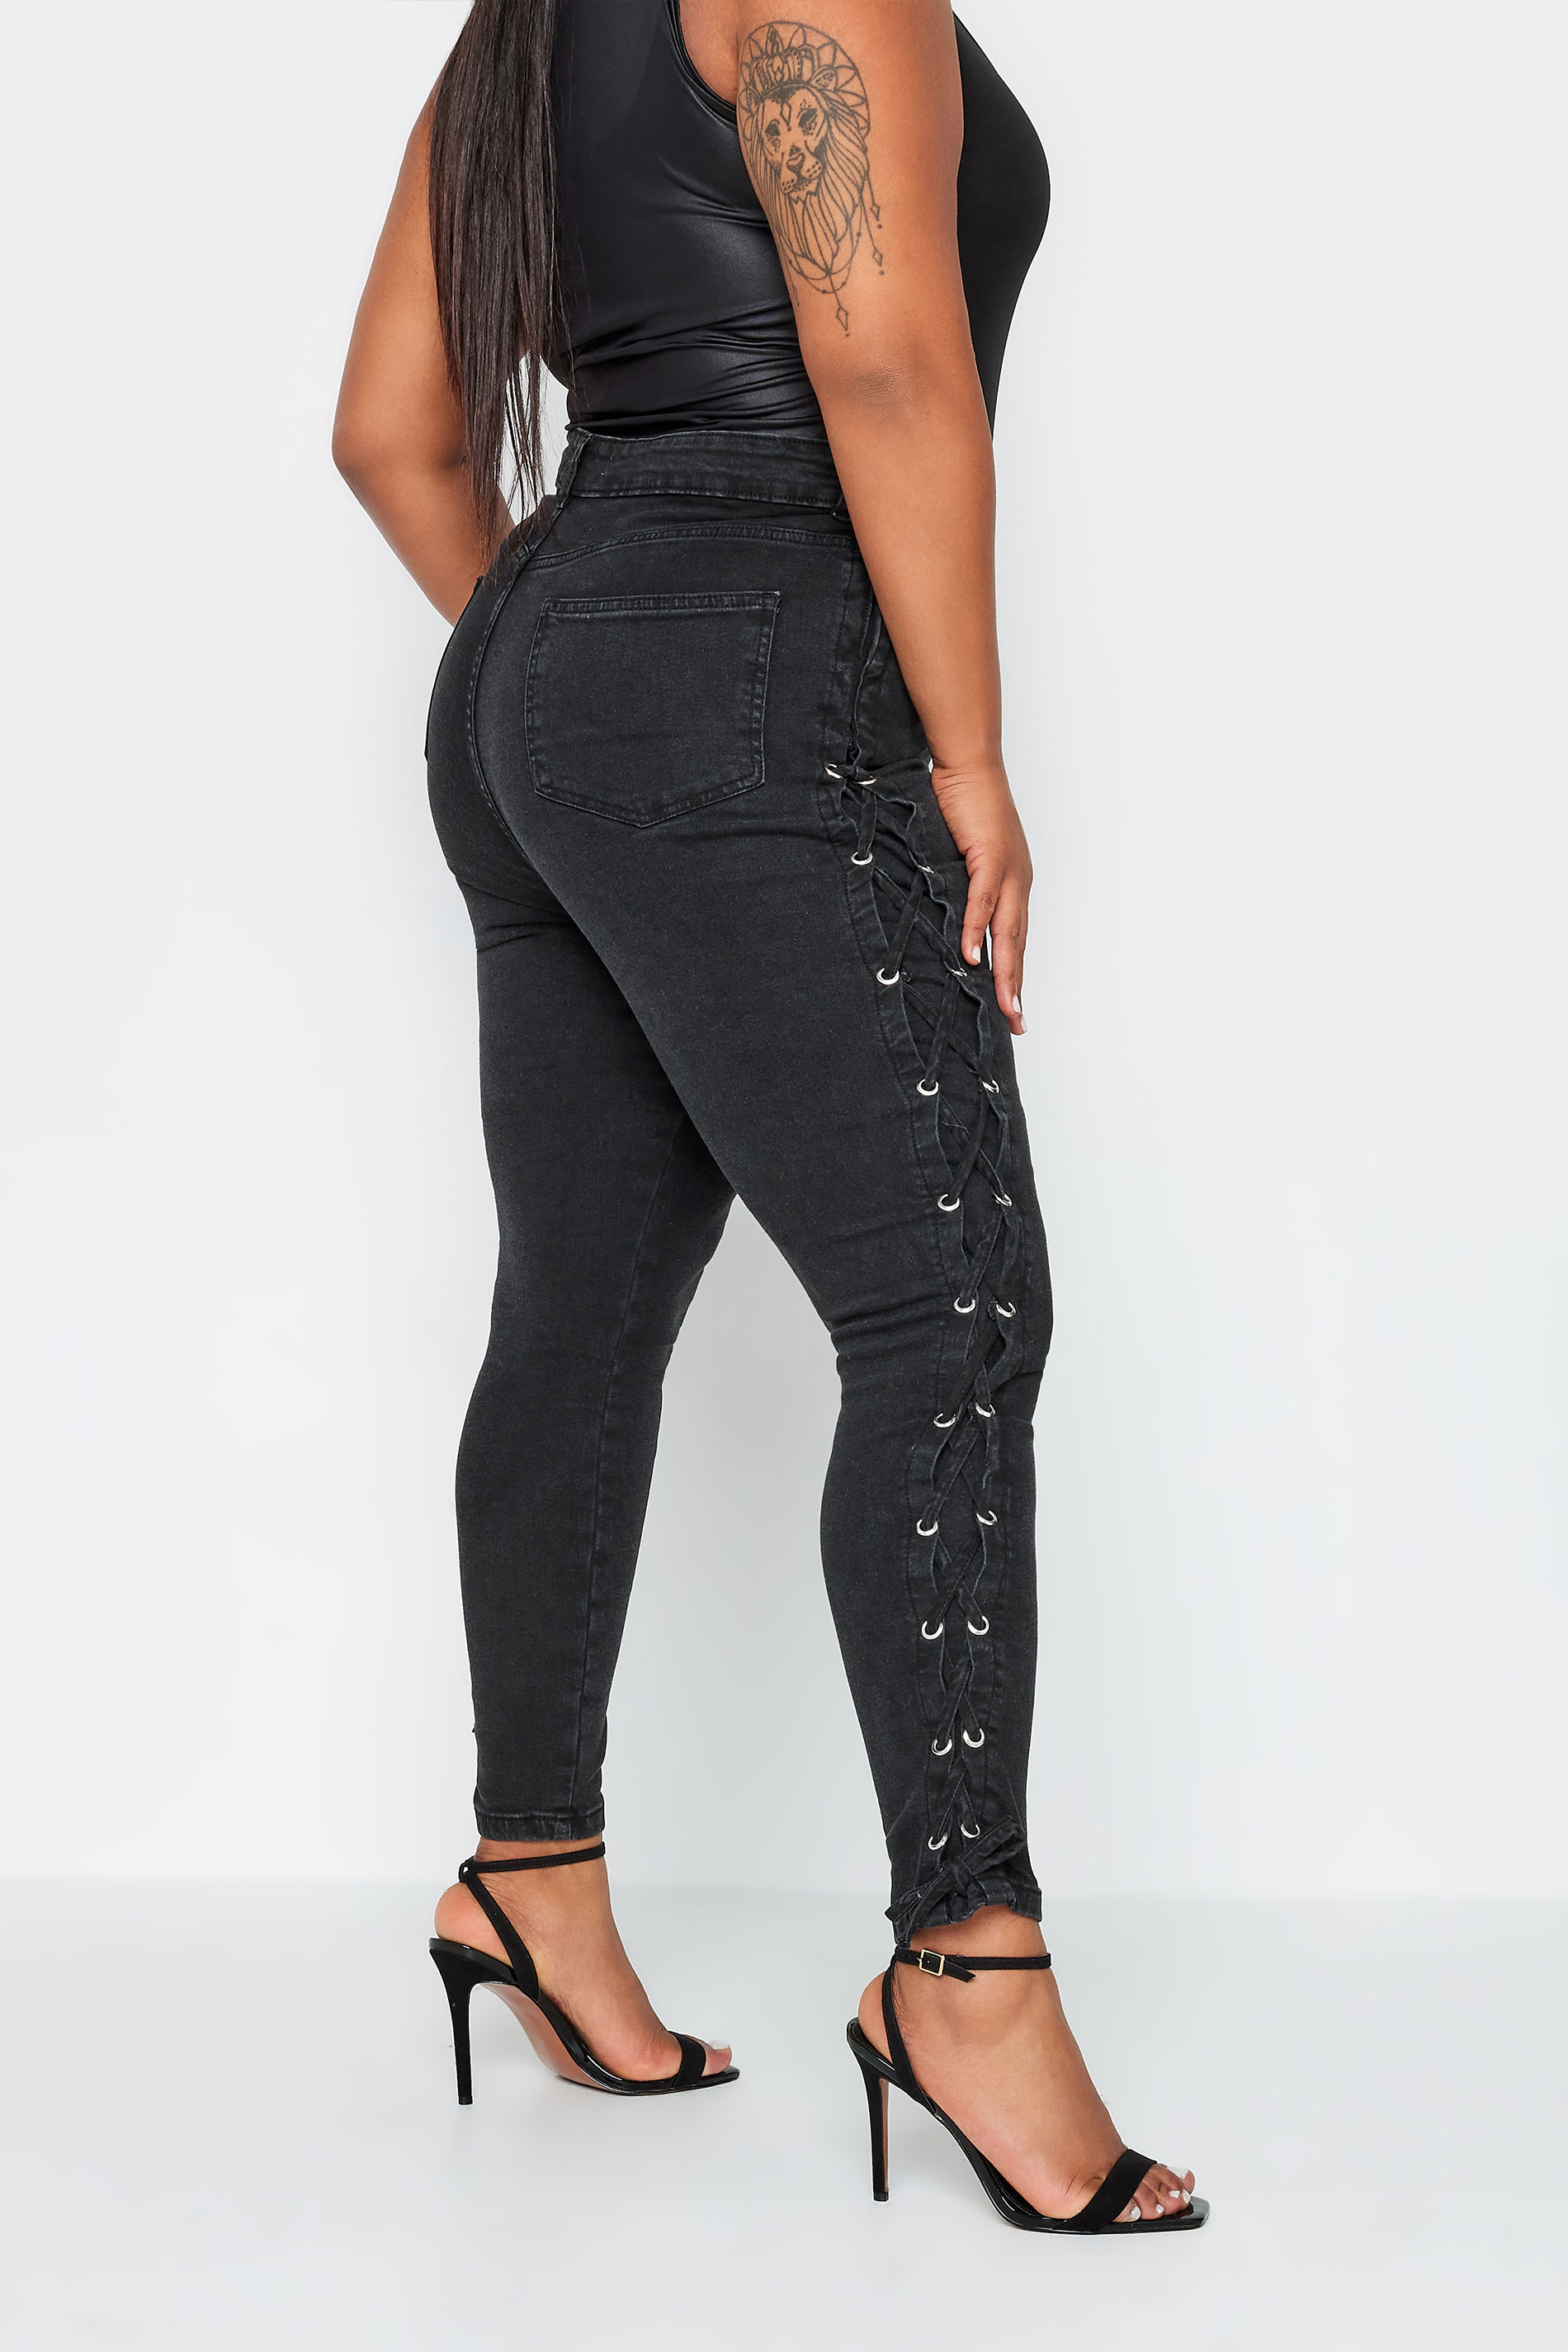 YOURS Plus Size Black Lace Up Detail Skinny AVA Jeans | Yours Clothing 3